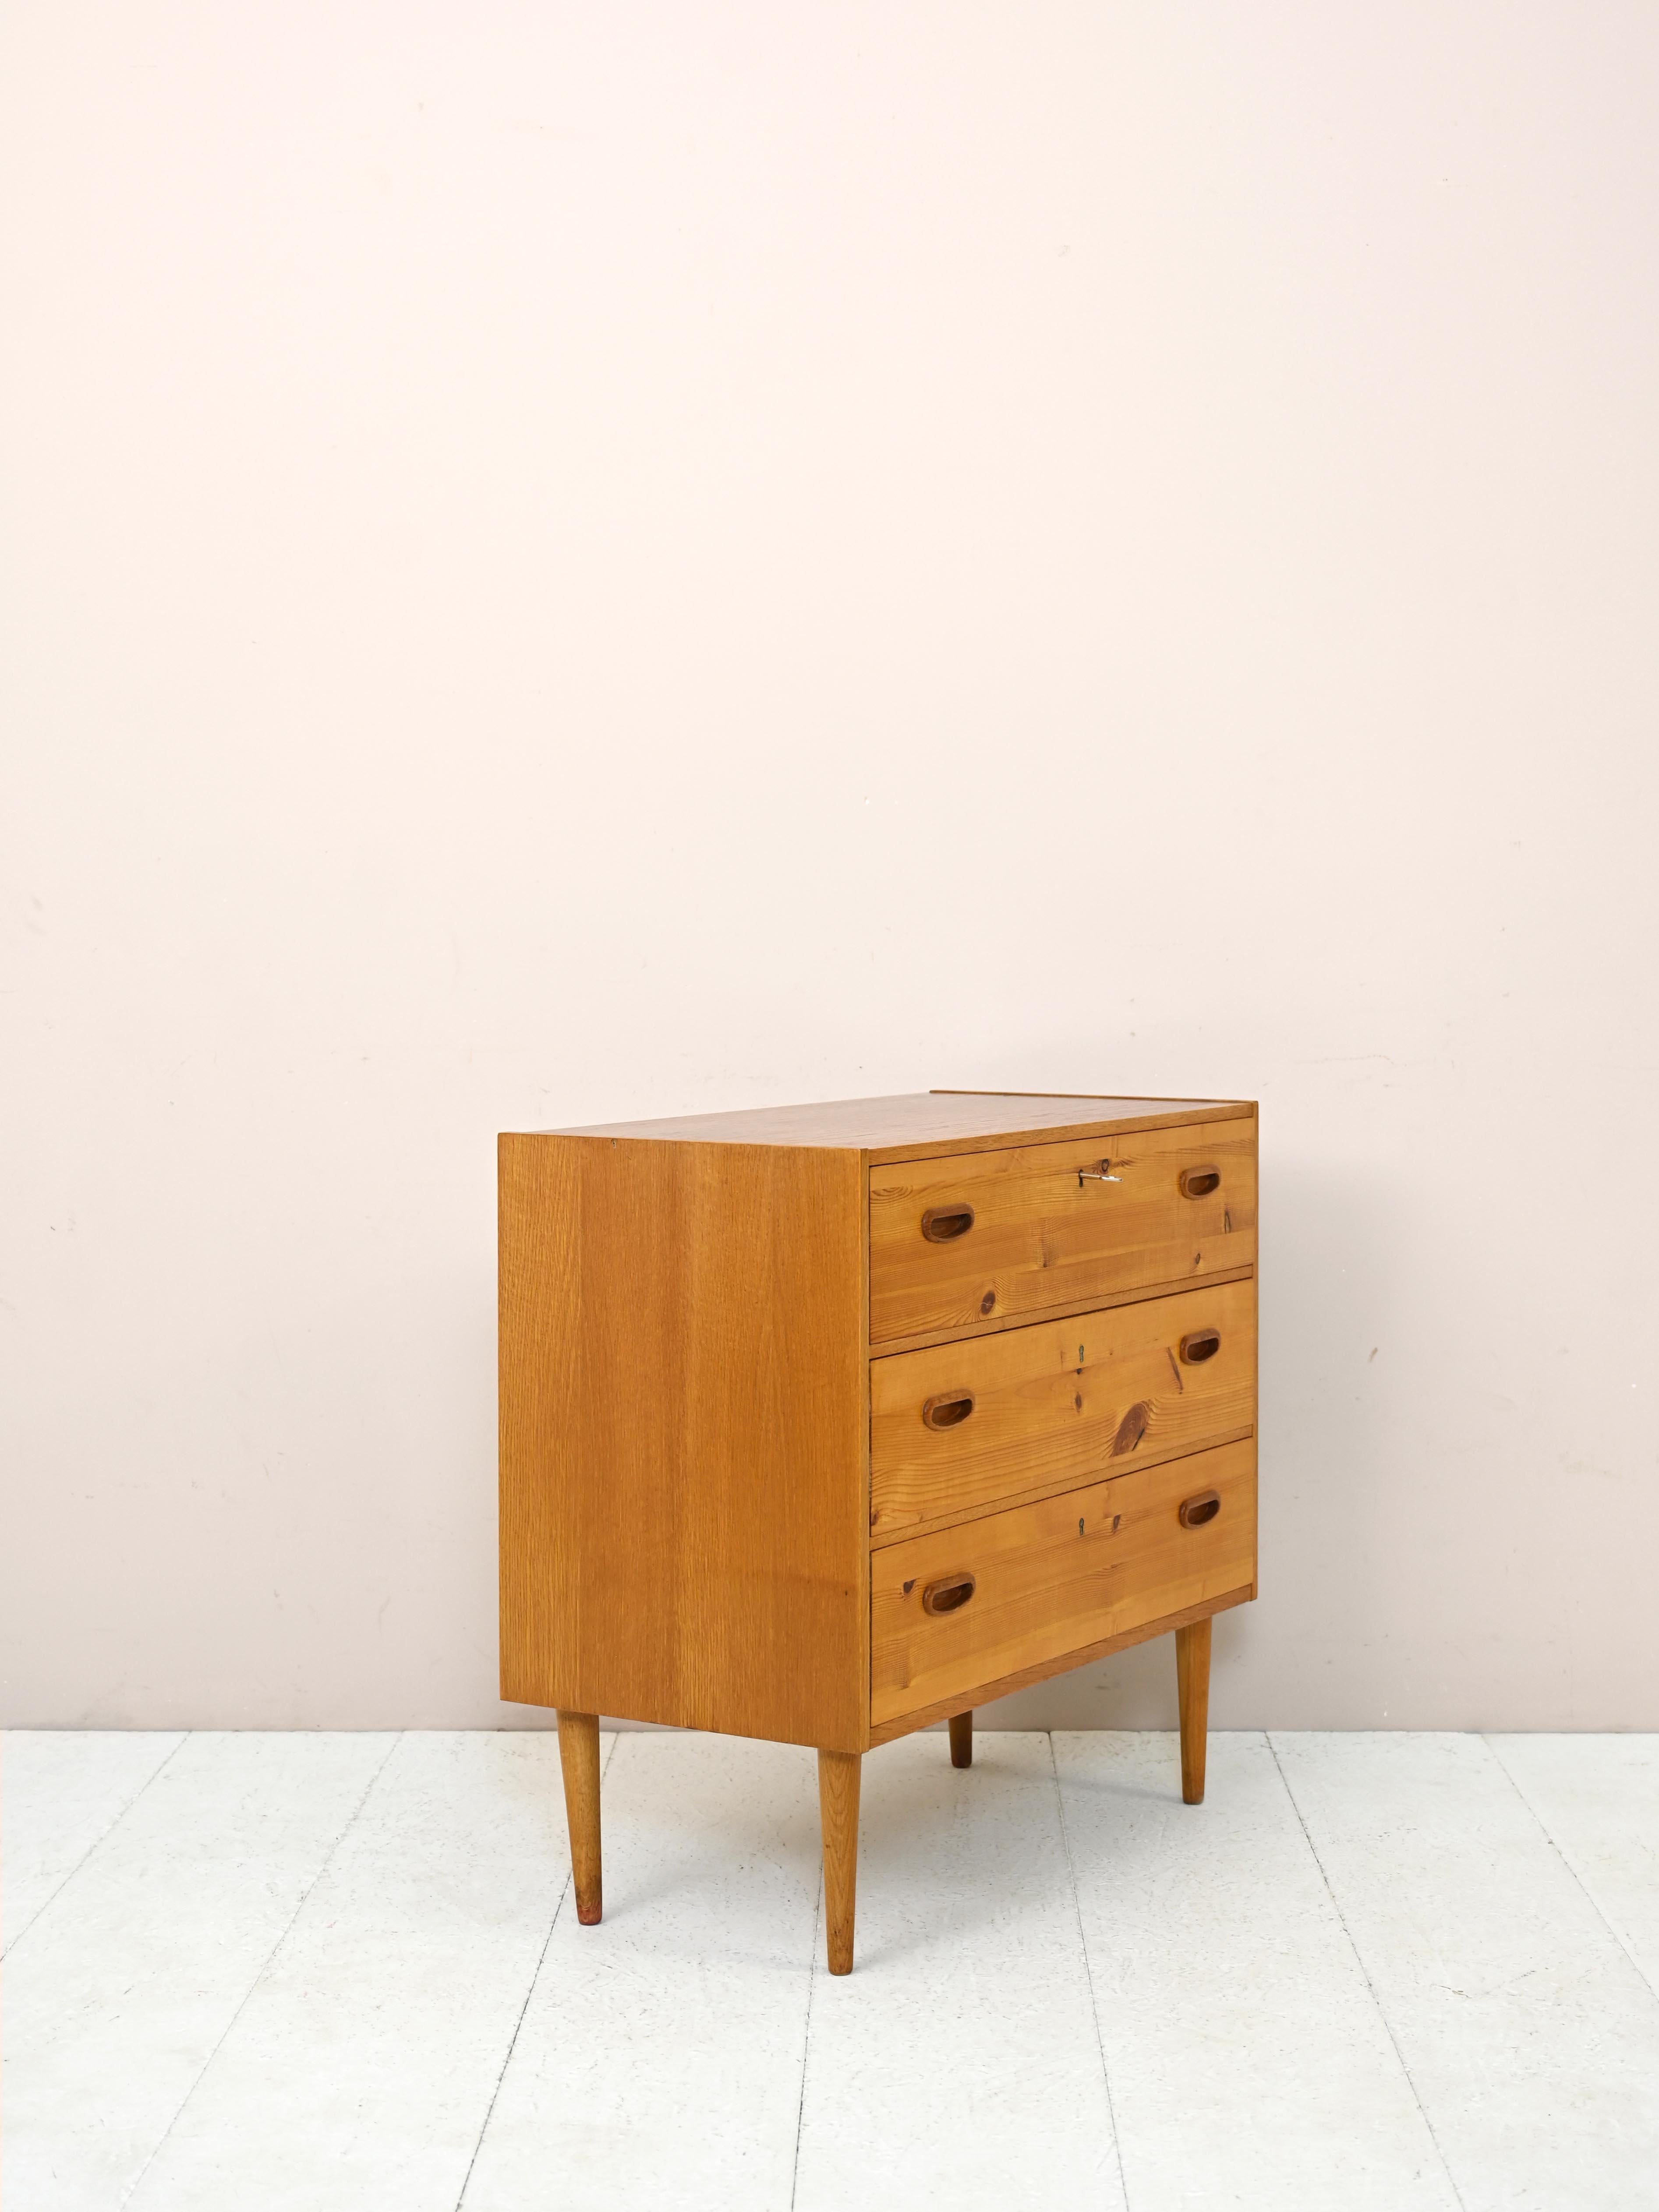 Scandinavian Modern Swedish Modernist Chest of Drawers from the 1960s For Sale